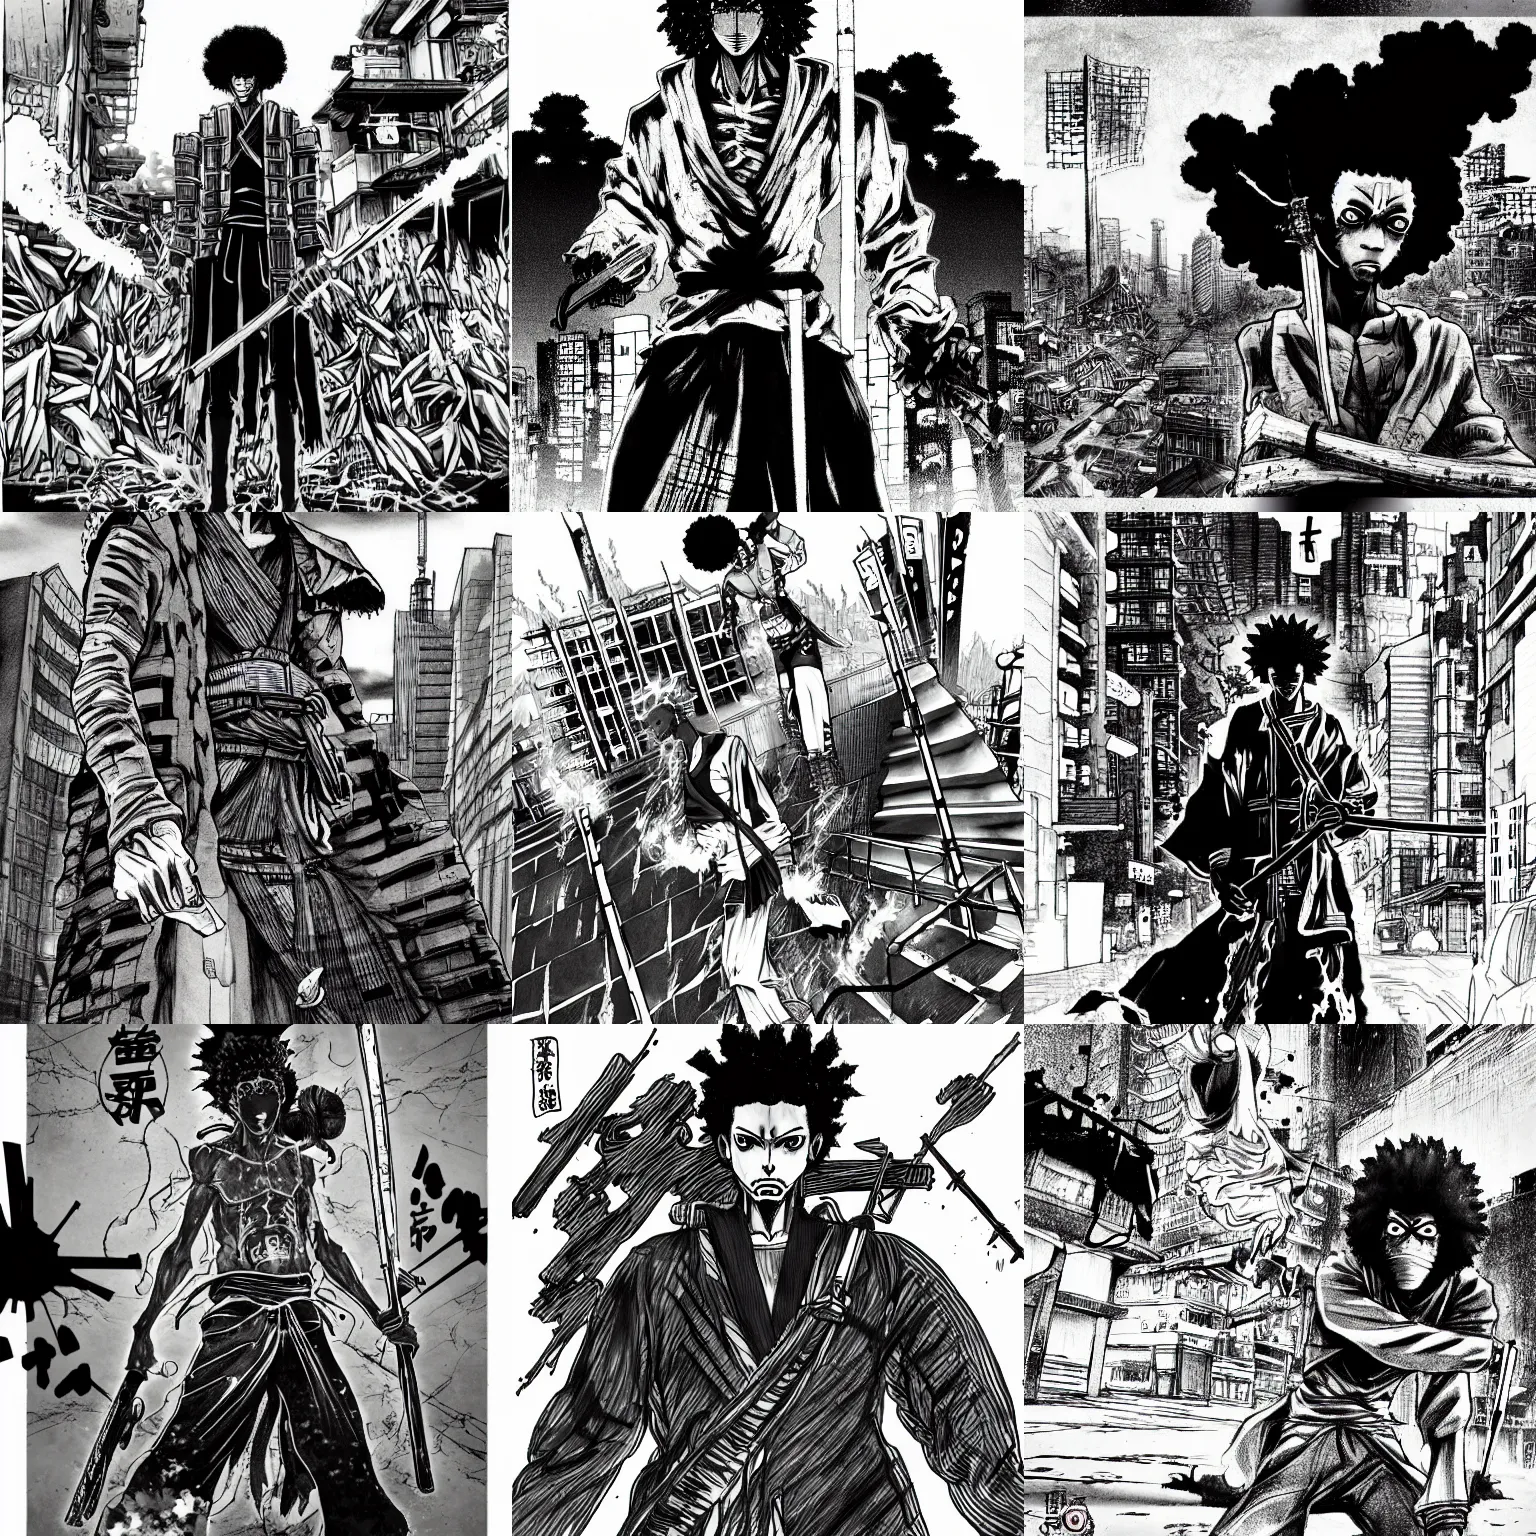 Prompt: afro samurai manga style, pencil and ink, in a post apocalyptic city